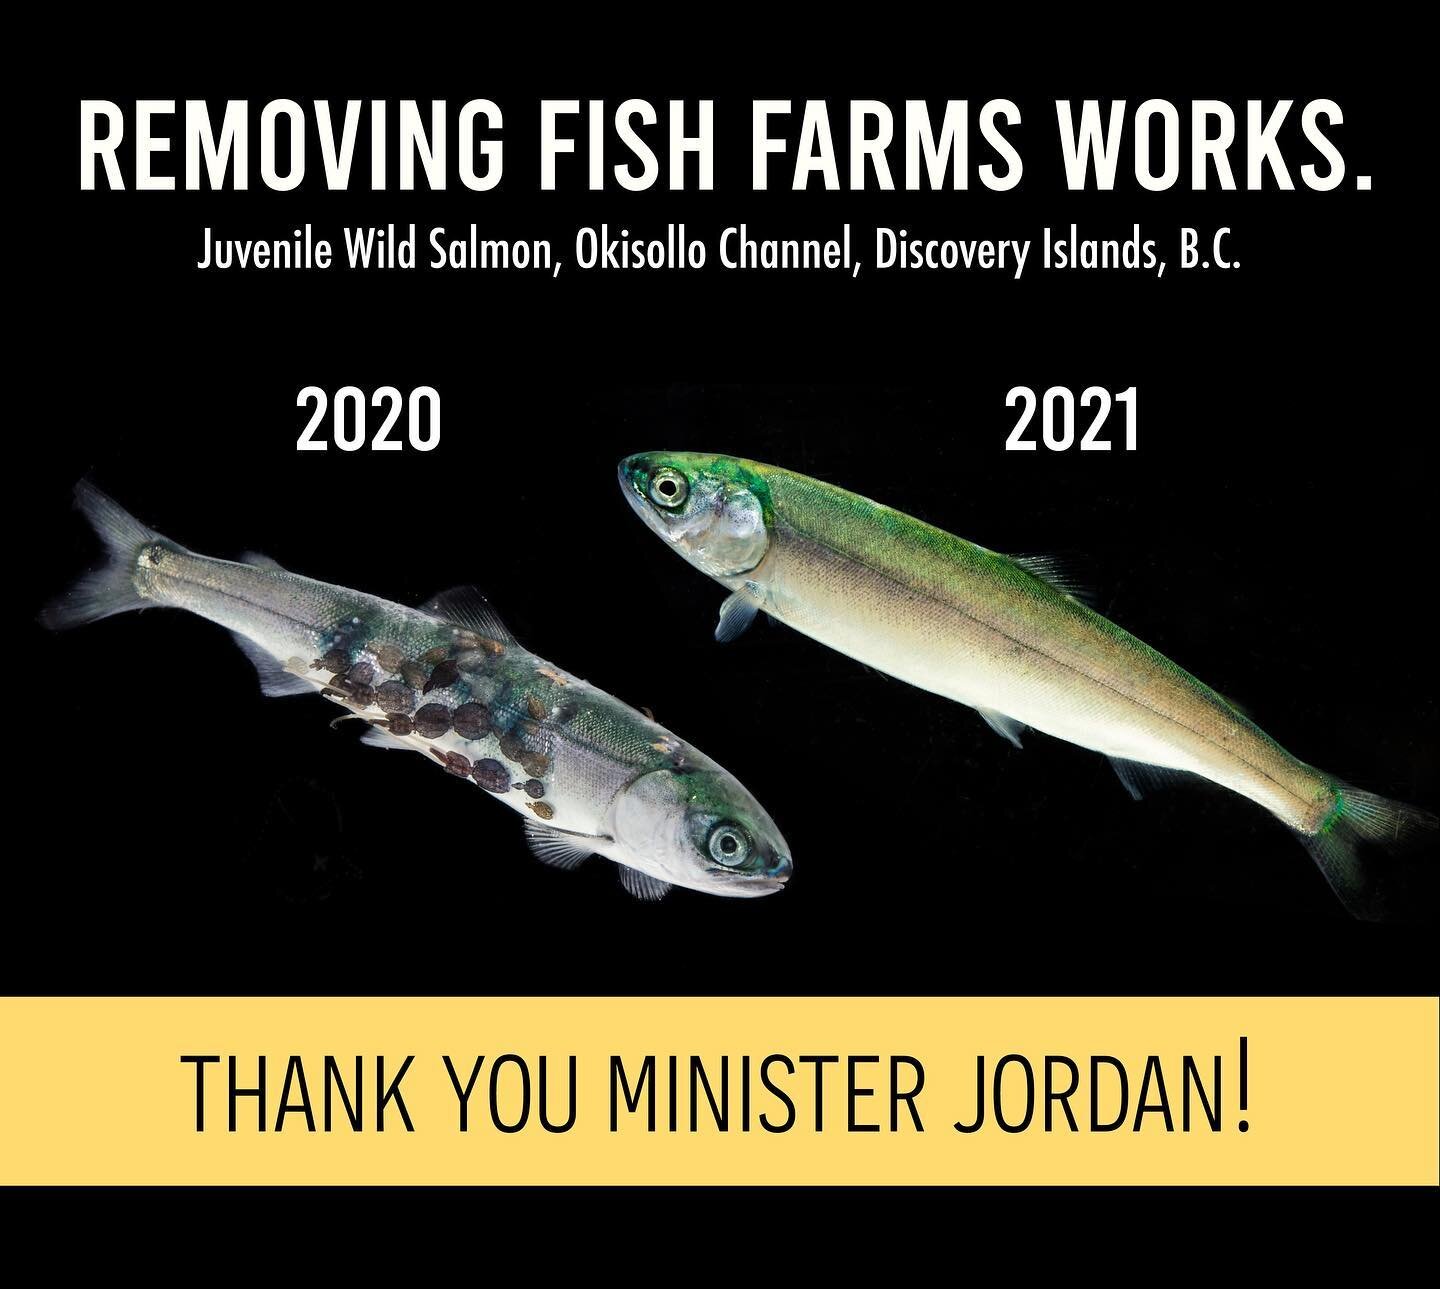 On December 17th 2020 Fisheries Minister @bernadettejordanmp made the decision to fulfill the wishes of seven consulting First Nations, and remove fish farms from the Discovery Islands. This spring we are so happy to say we are seeing the incredible 